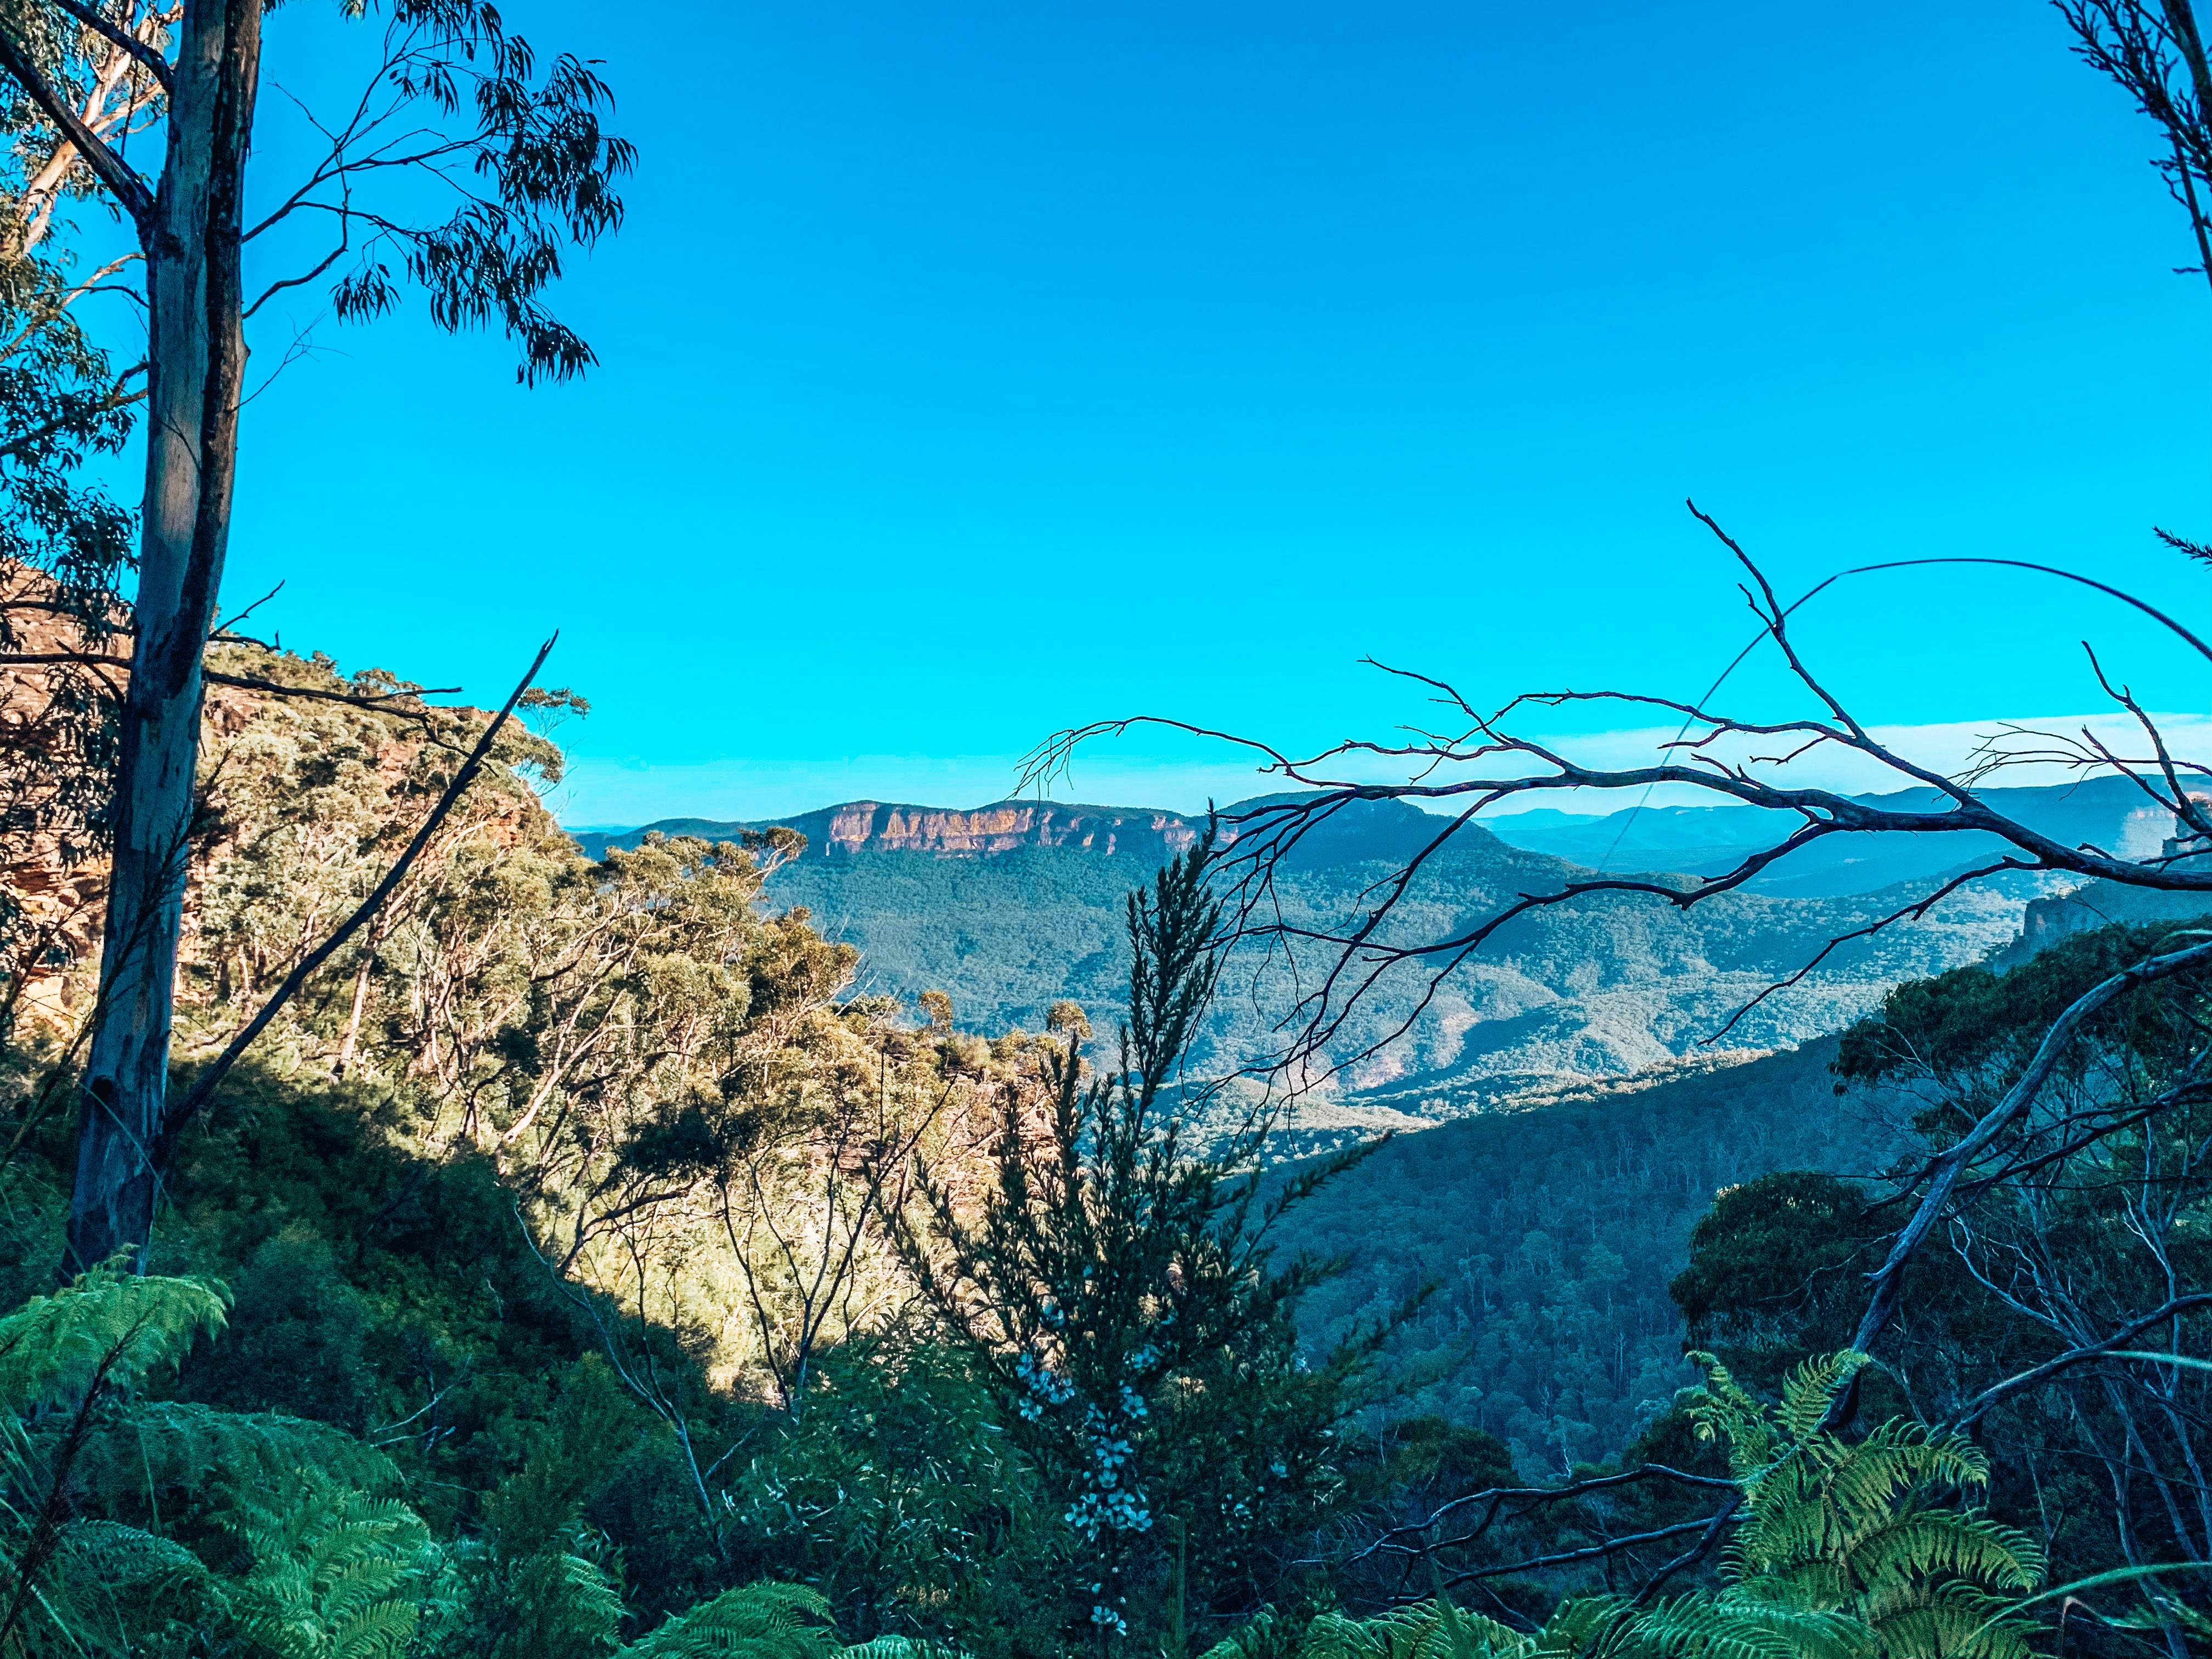 View of the Blue Mountains, Sydney